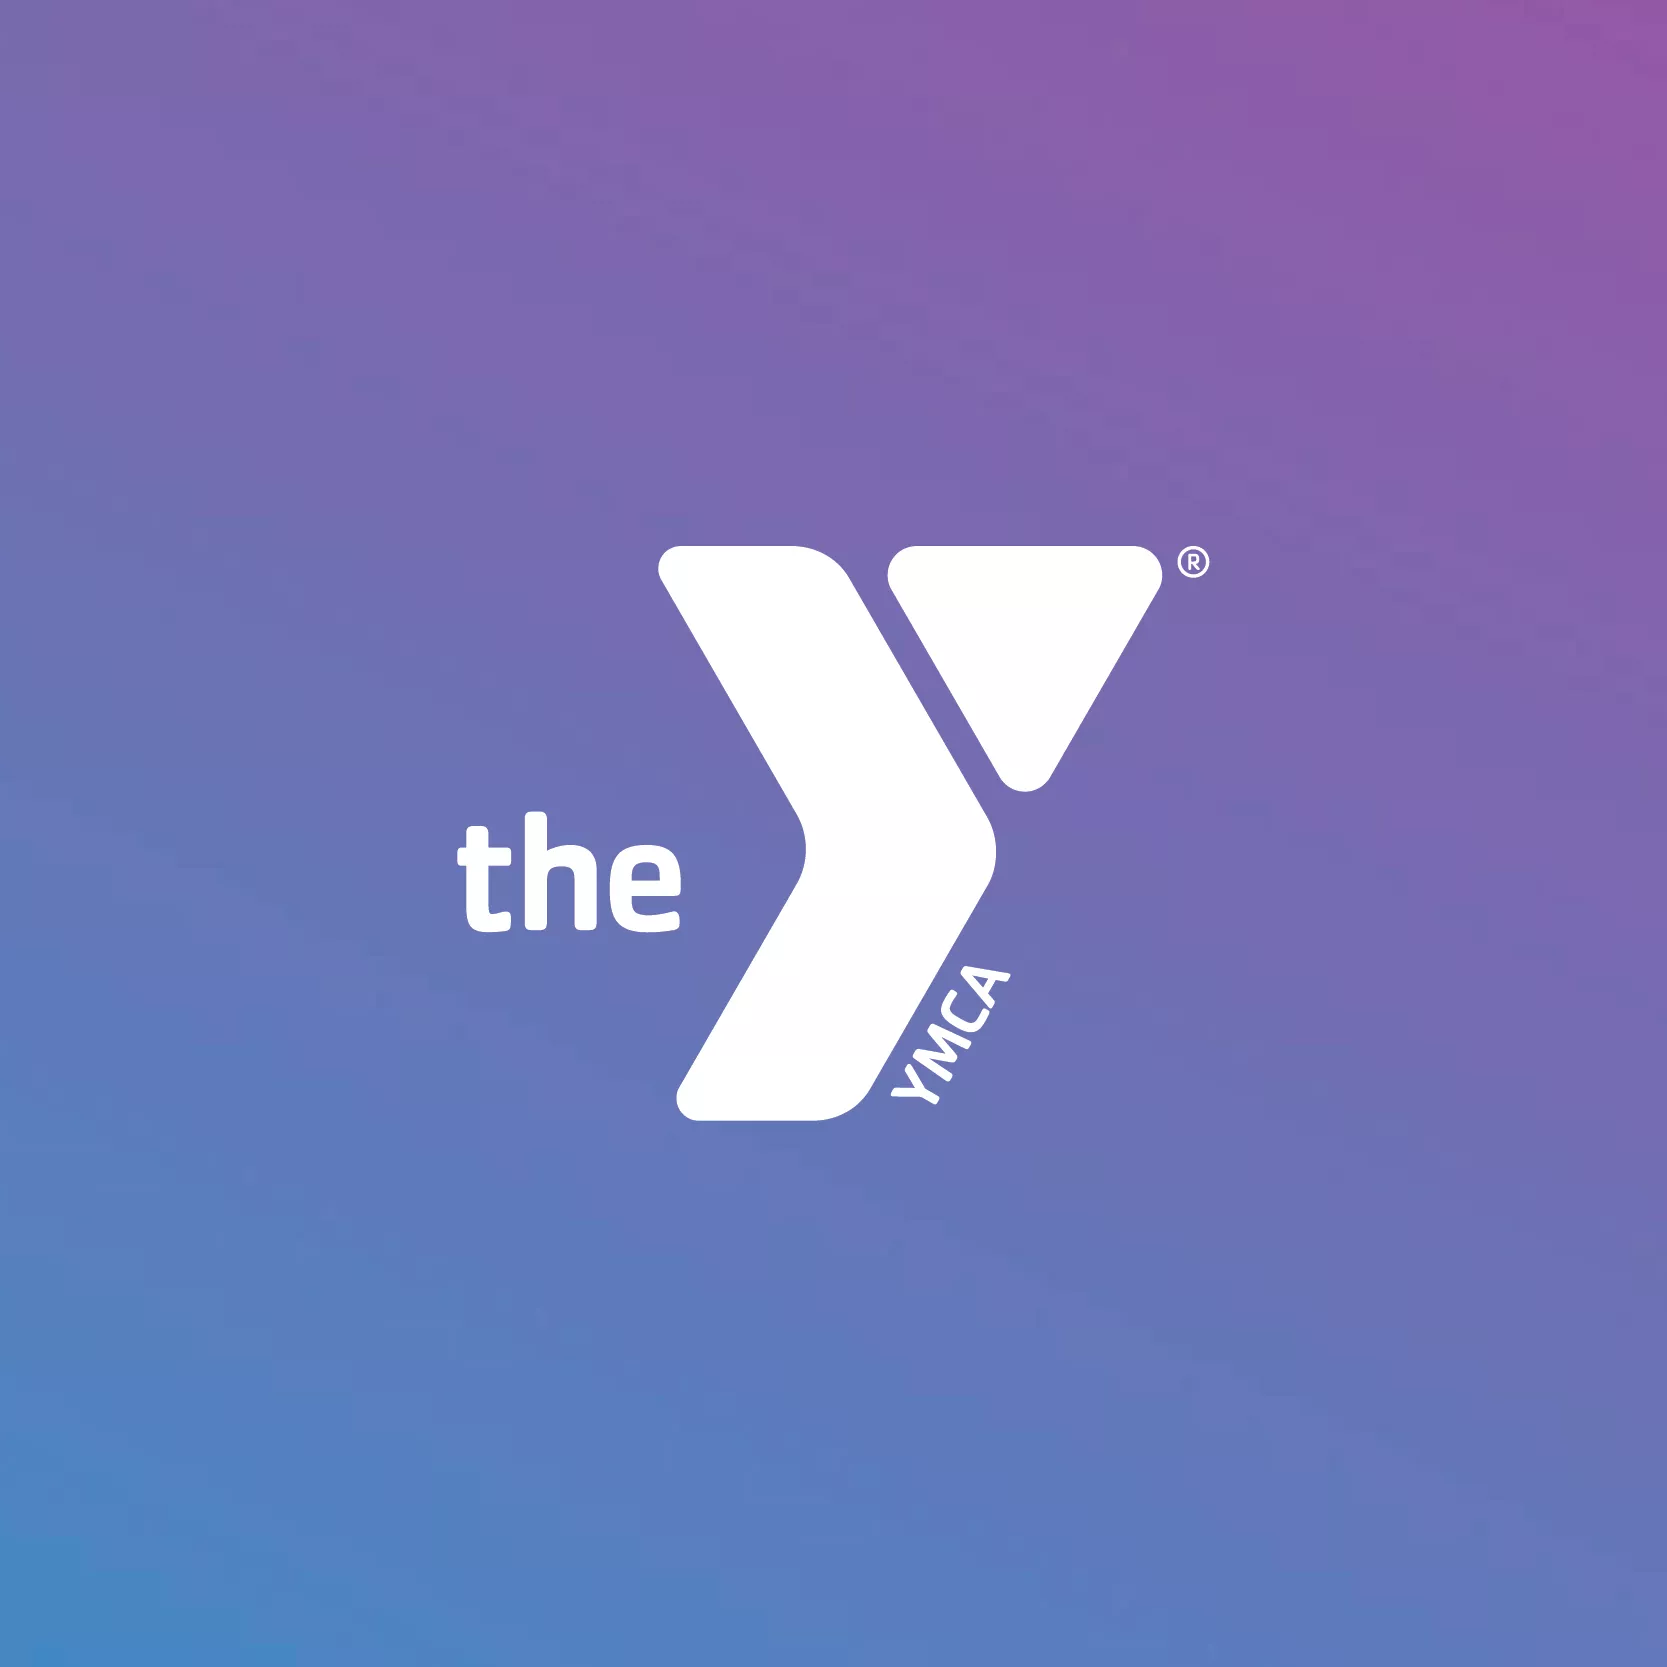 YMCA Announces New Board Chair for 2021-2023 Term